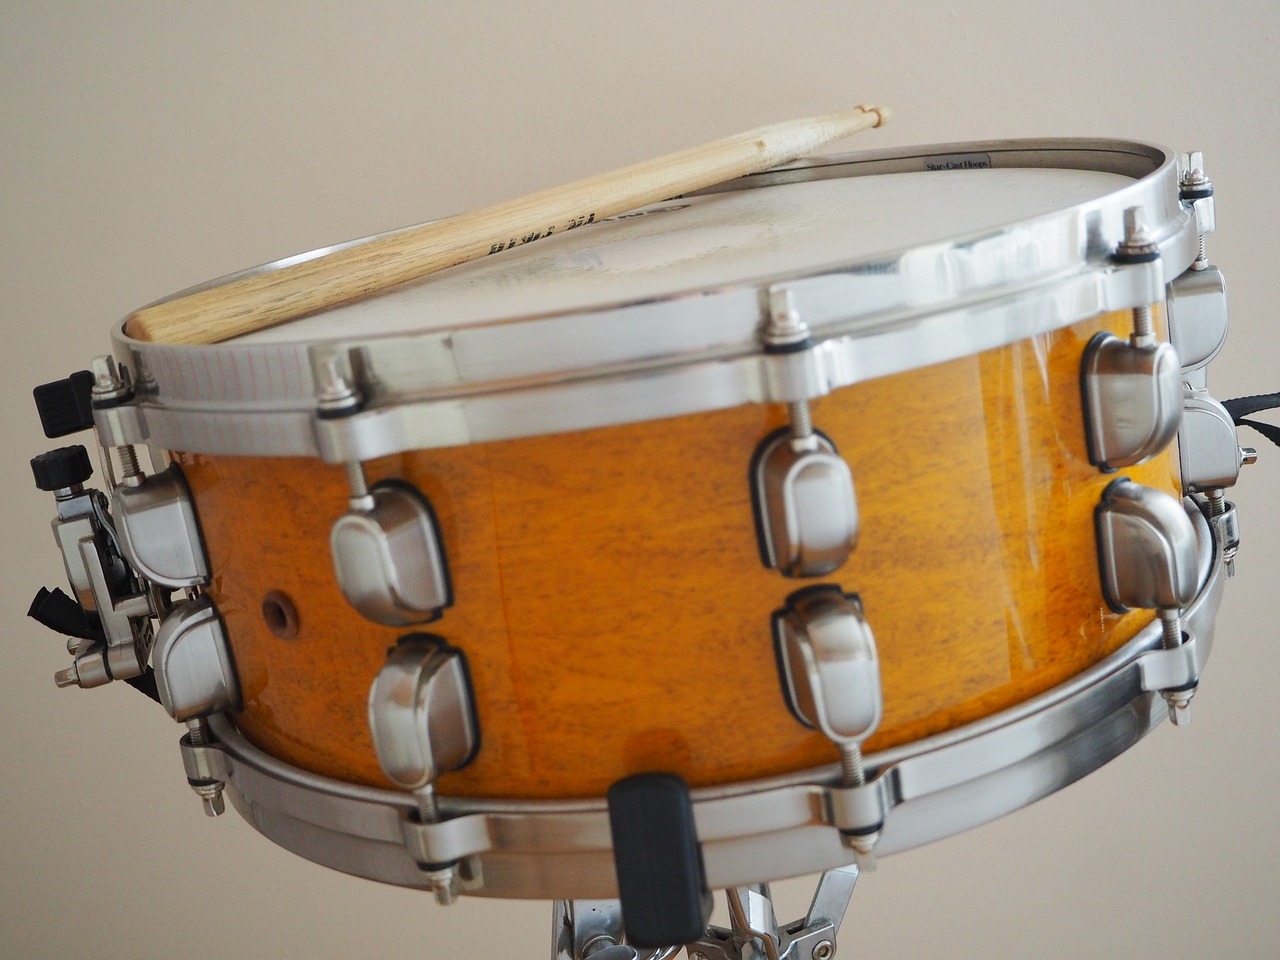 a drum with a wooden stick on top of it, by David Simpson, pixabay, shiny knobs, yellow, midcentury modern, 7 0 mm photo